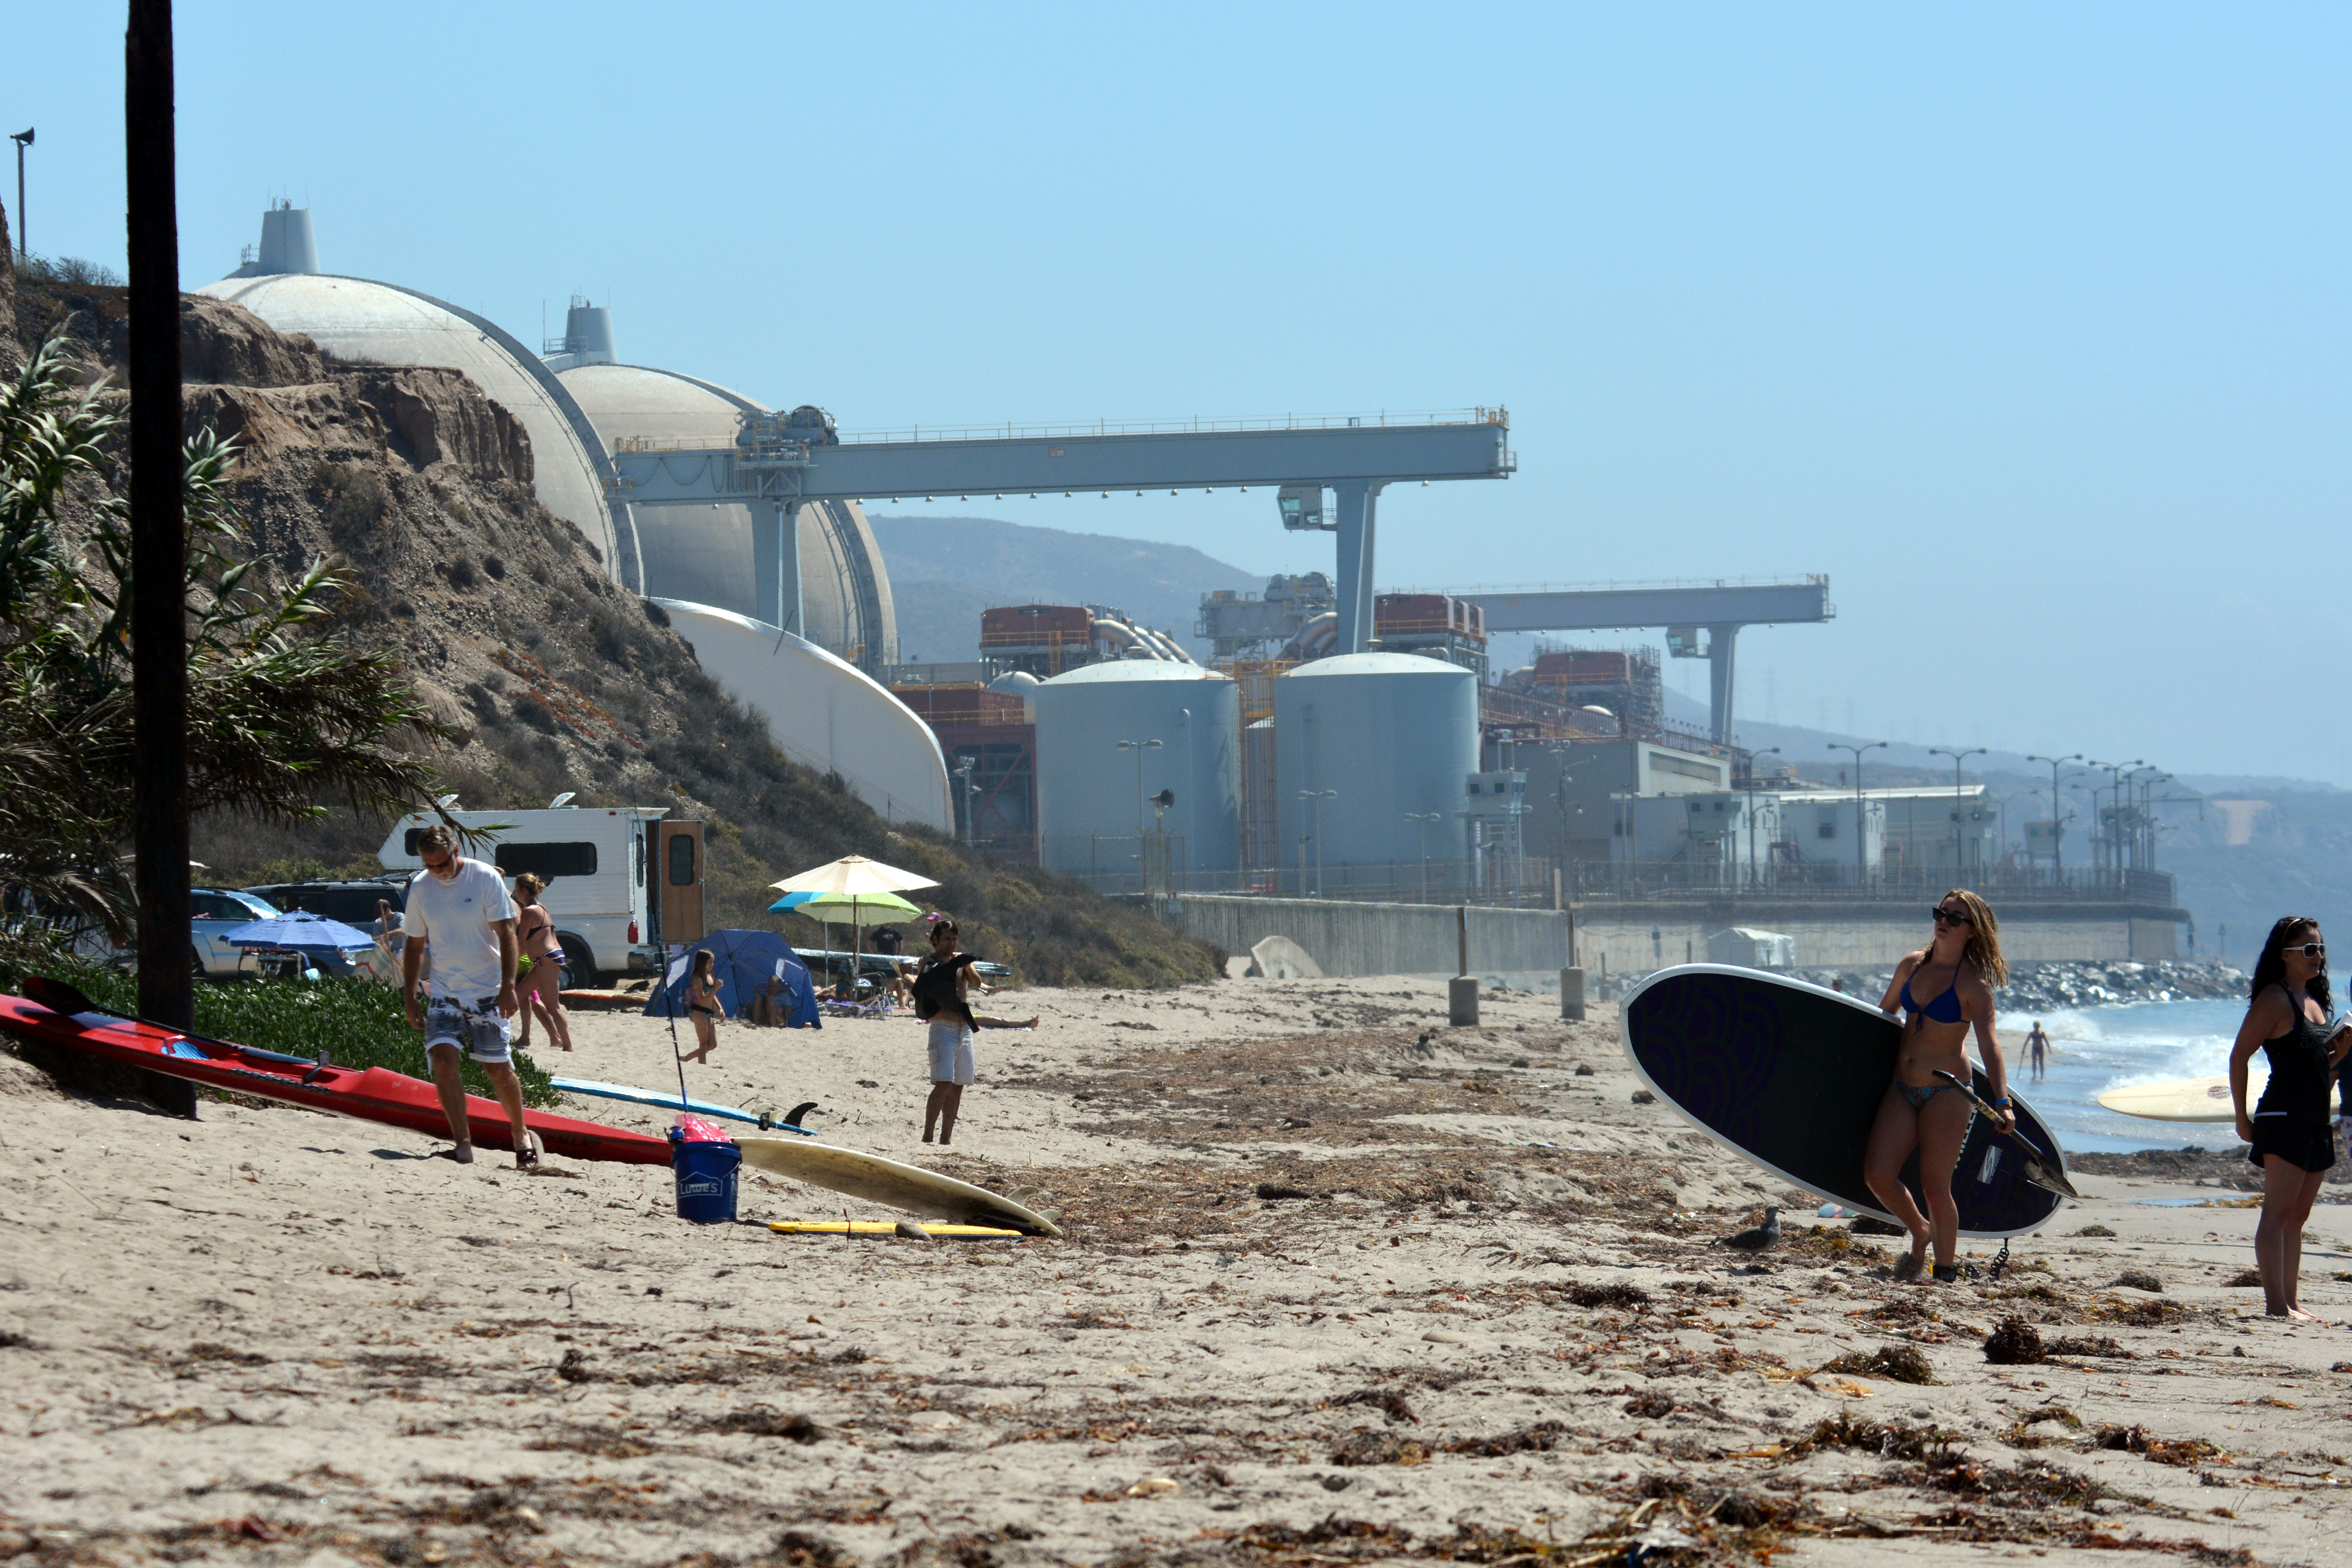 Surfers near the now-shuttered San Onofre reactors in southern California.